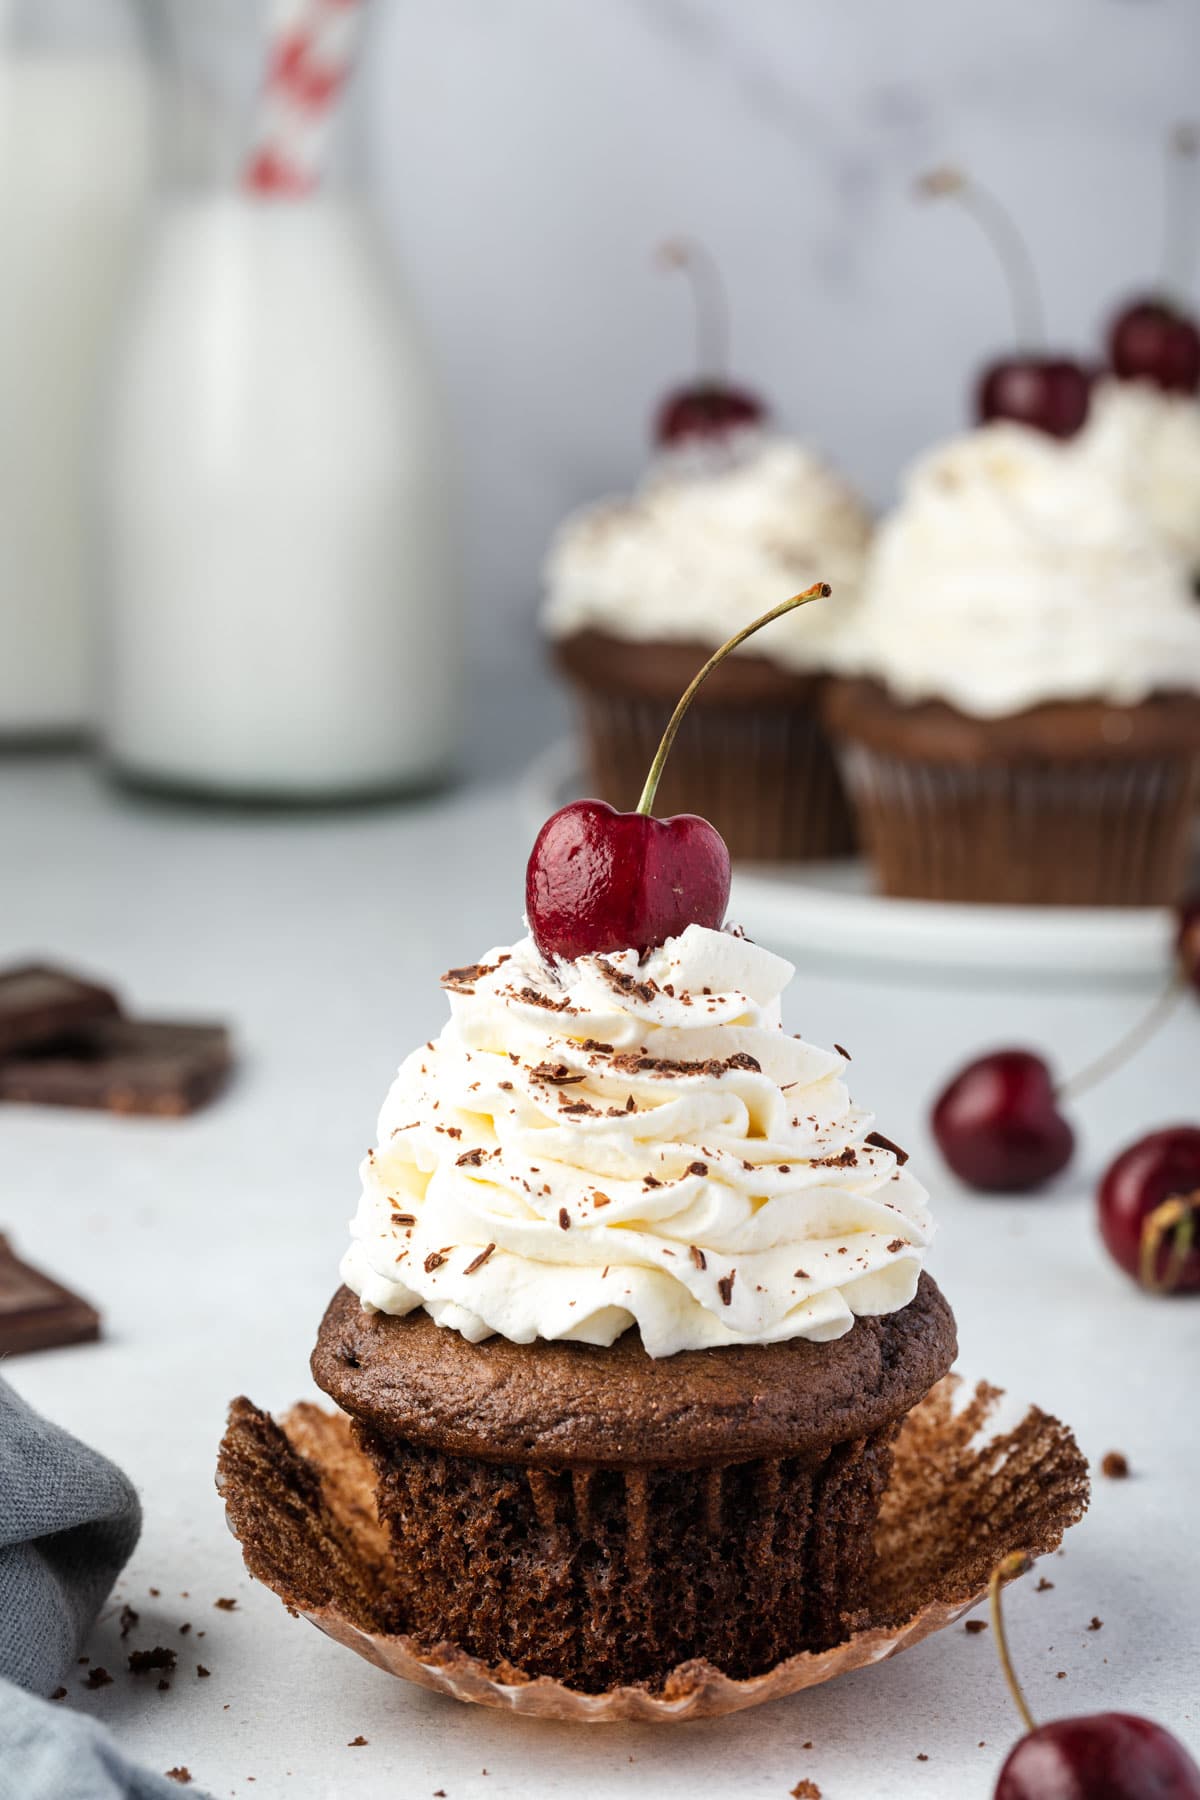 Black forest cupcake with liner peeled off and a plate of cupcakes & jar of milk in background.